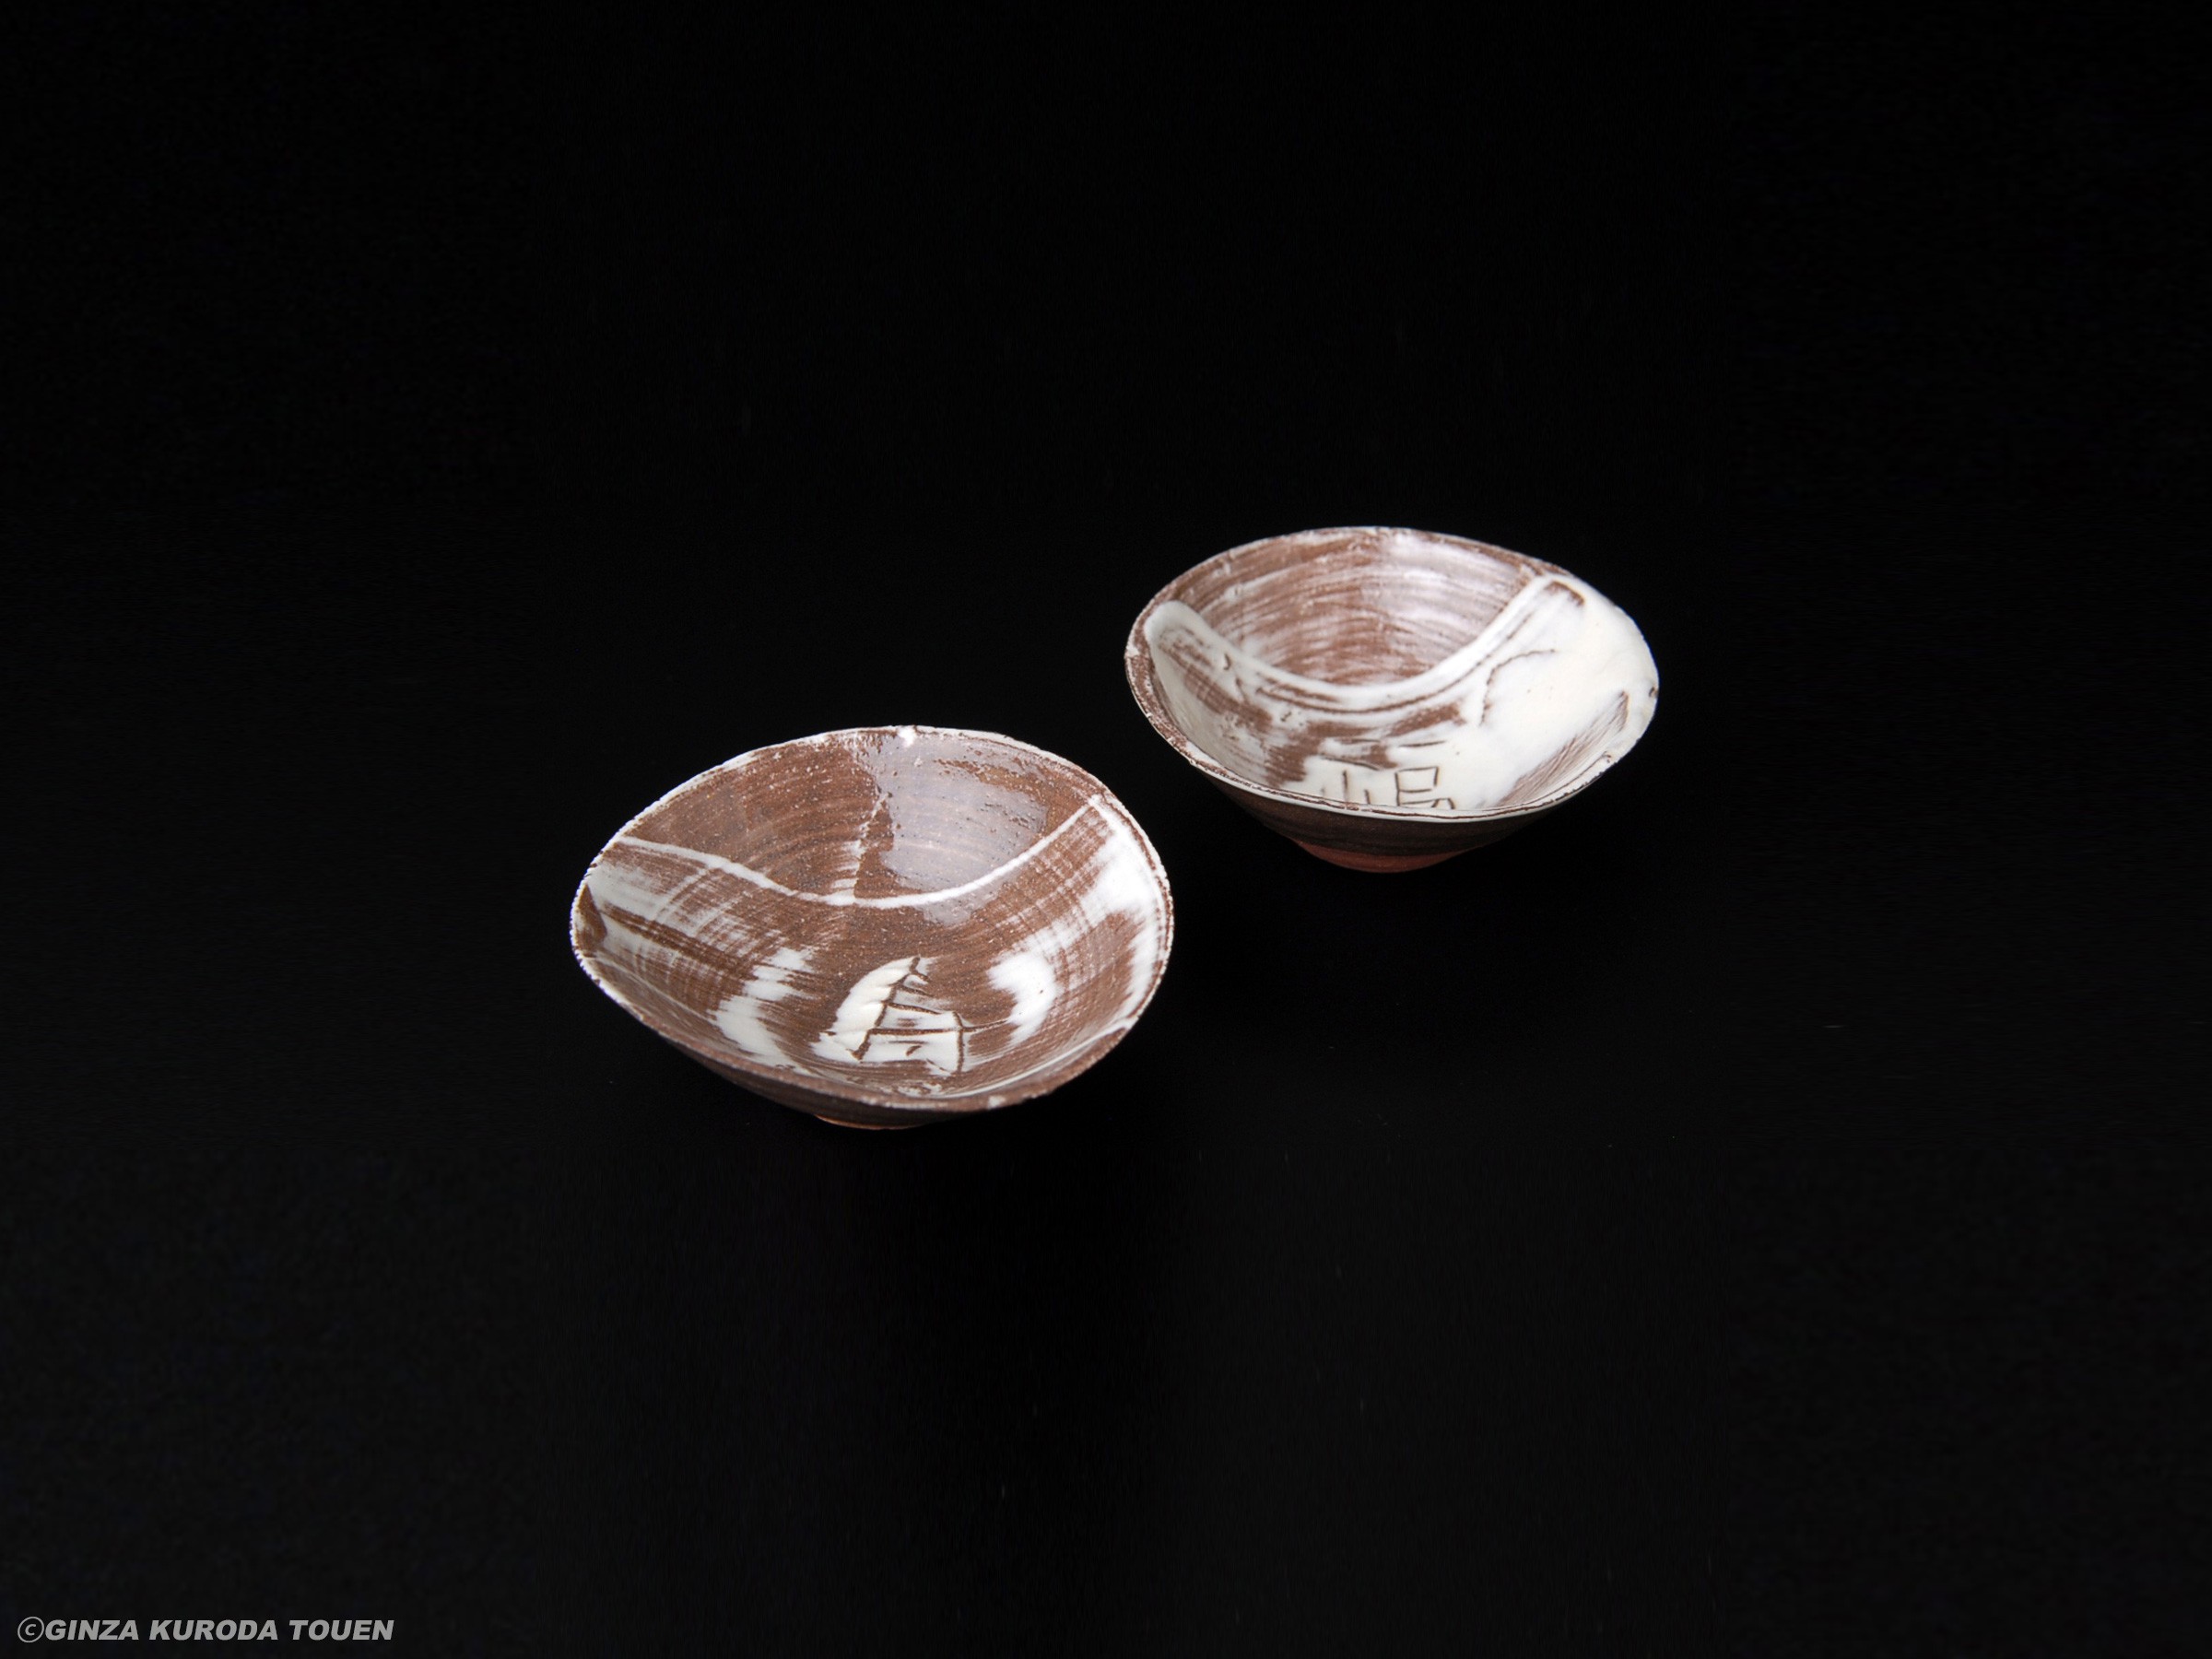 Kazuo Yagi: A set of two sake cups, 'Longevity and fortune'